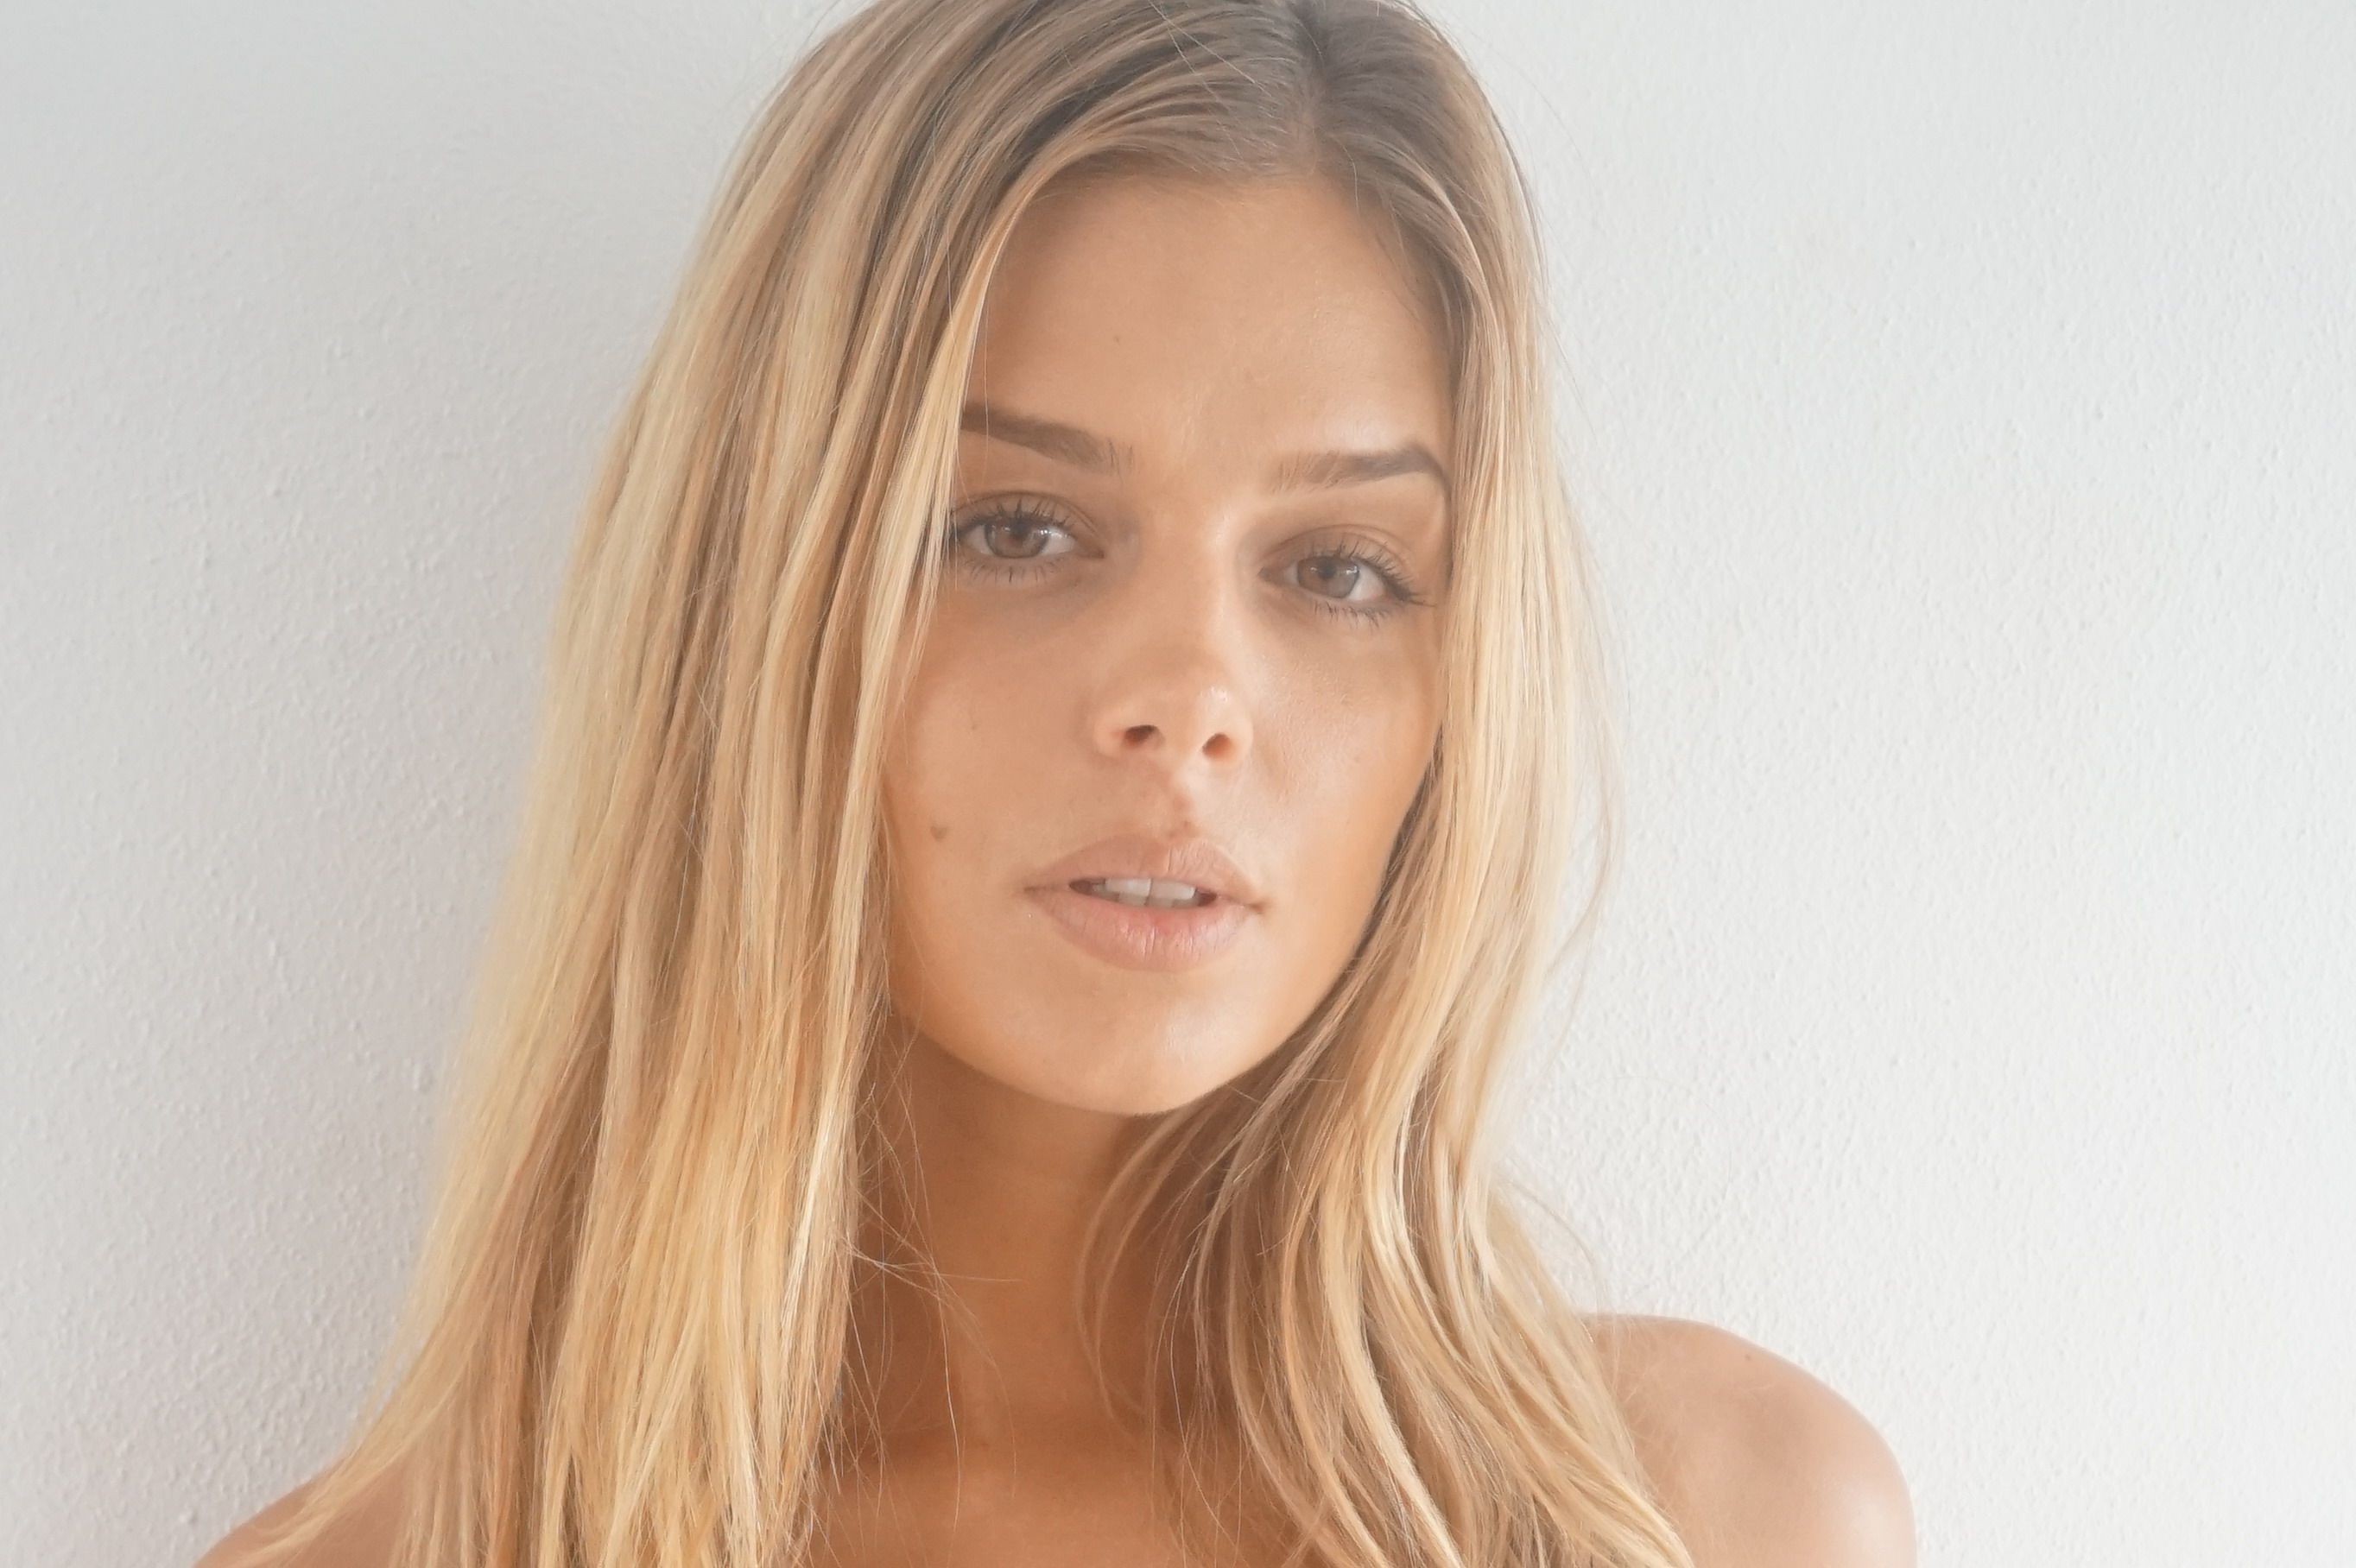 1677774510 847 Danielle Knudson Nude TheFappening 211 - Danielle Knudson Nude Leaked (Over 200 Photos!)